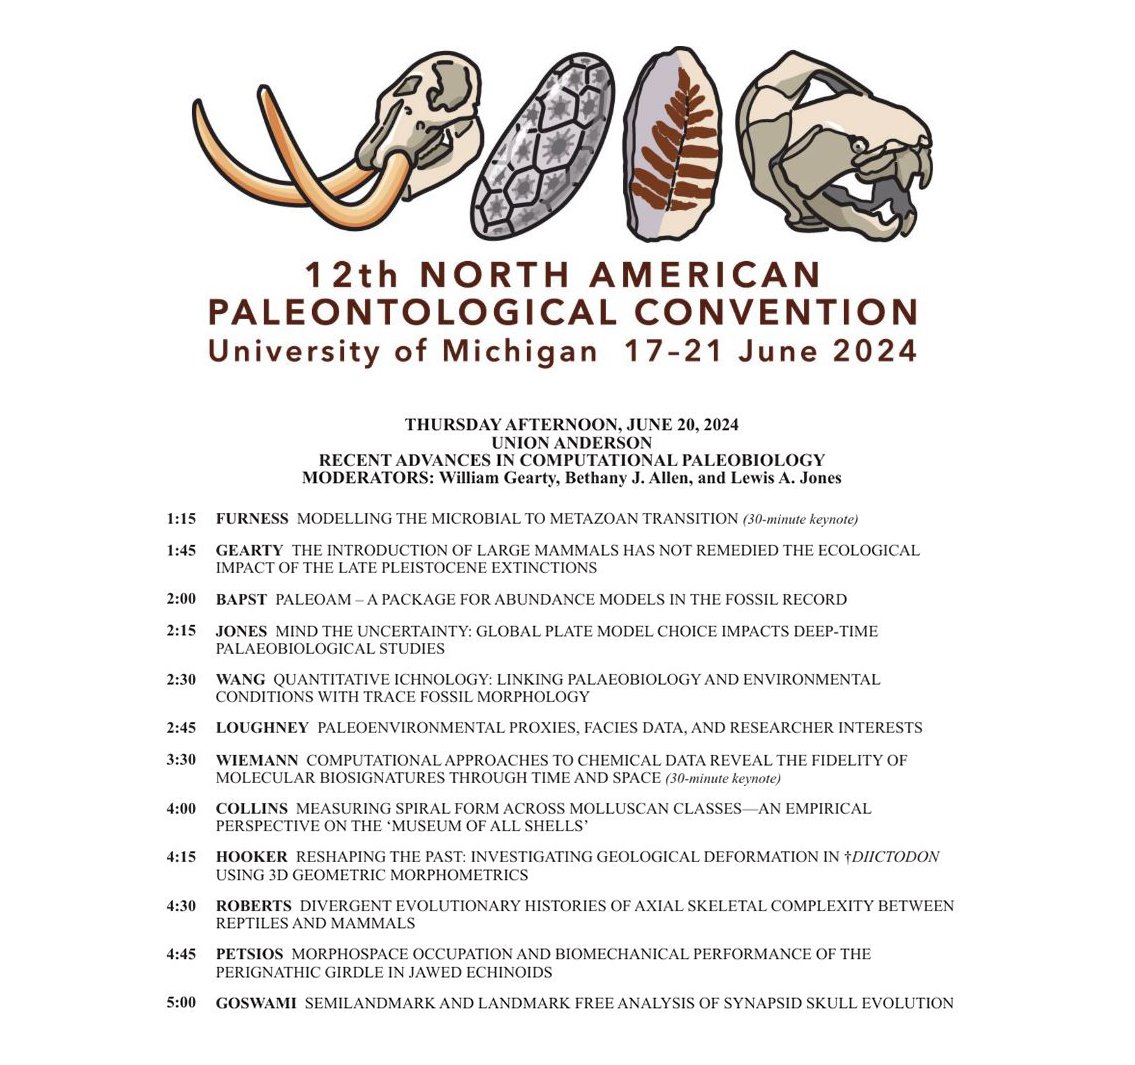 Finally got everything organized for my first @Napc2024 - the program looks absolutely exciting! 

See you all in the computational paleobiology session organized by @willgearty, @bethany_j_allen, & @LewisAlanJones: #multicellularity, #biosignatures, #ecosystems, & morphology!